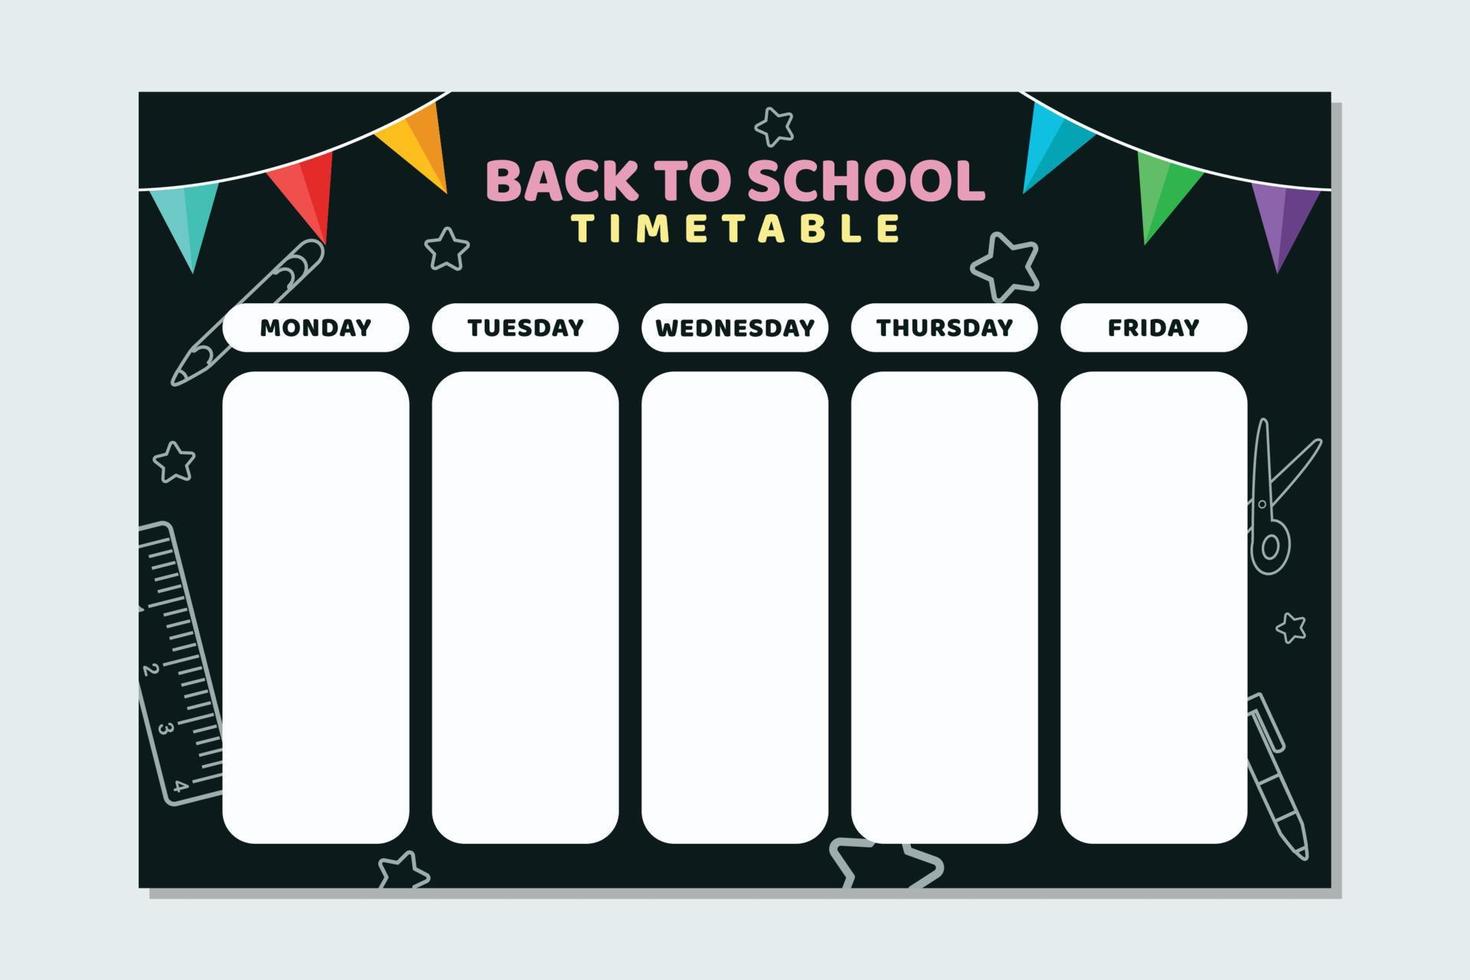 Back to School TimeTable Template Stationery Background vector